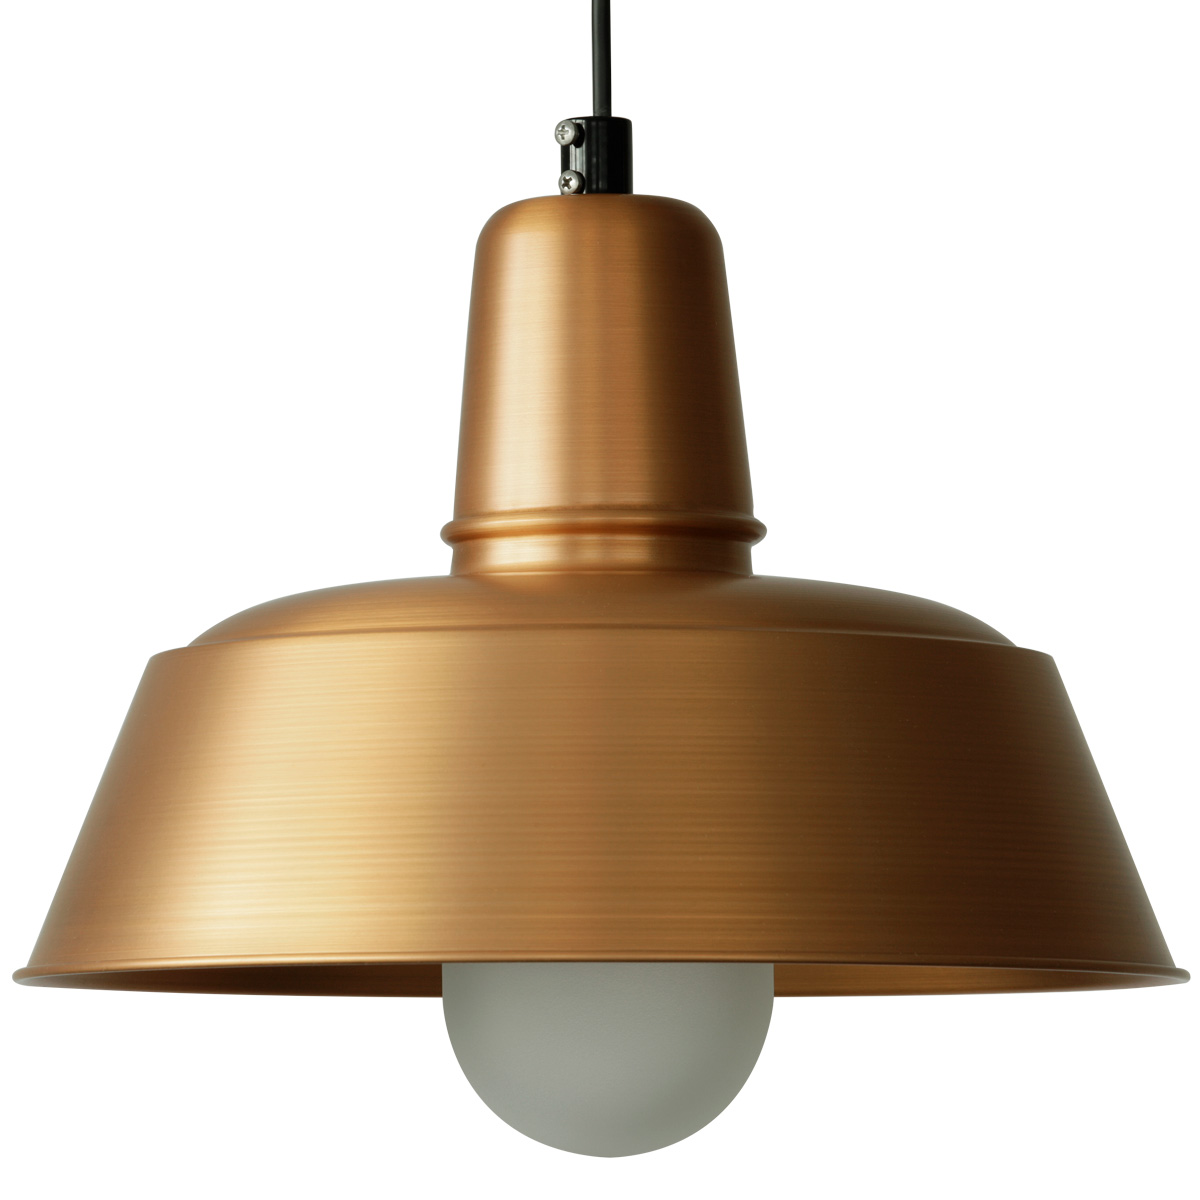 Timeless Industrial Copper Pendant Light Berlin with Glass